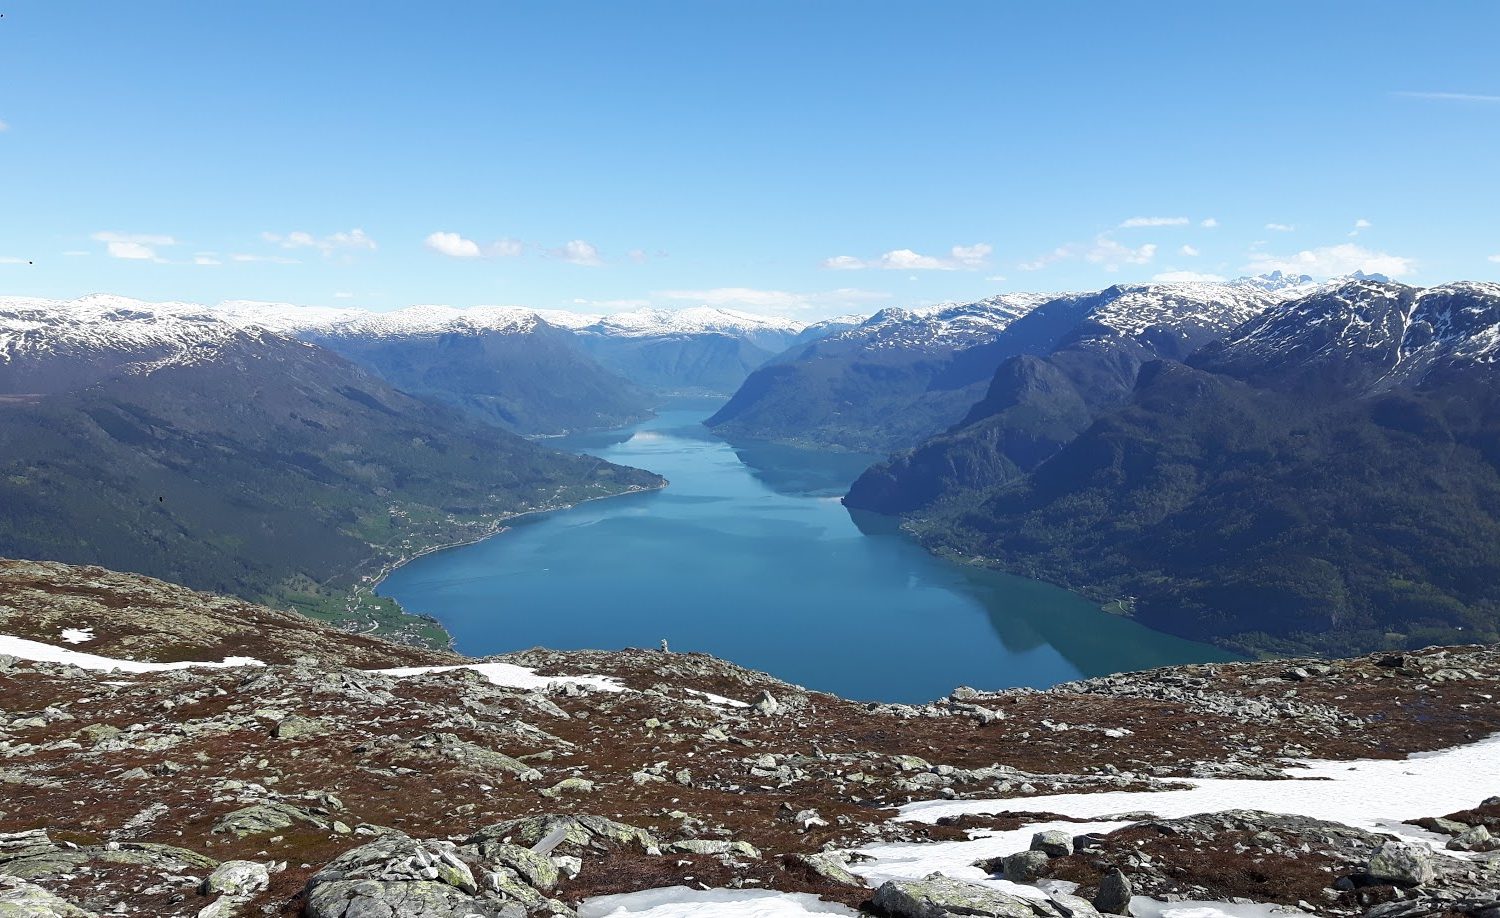 Self guided hiking tour in the Fjords of Norway